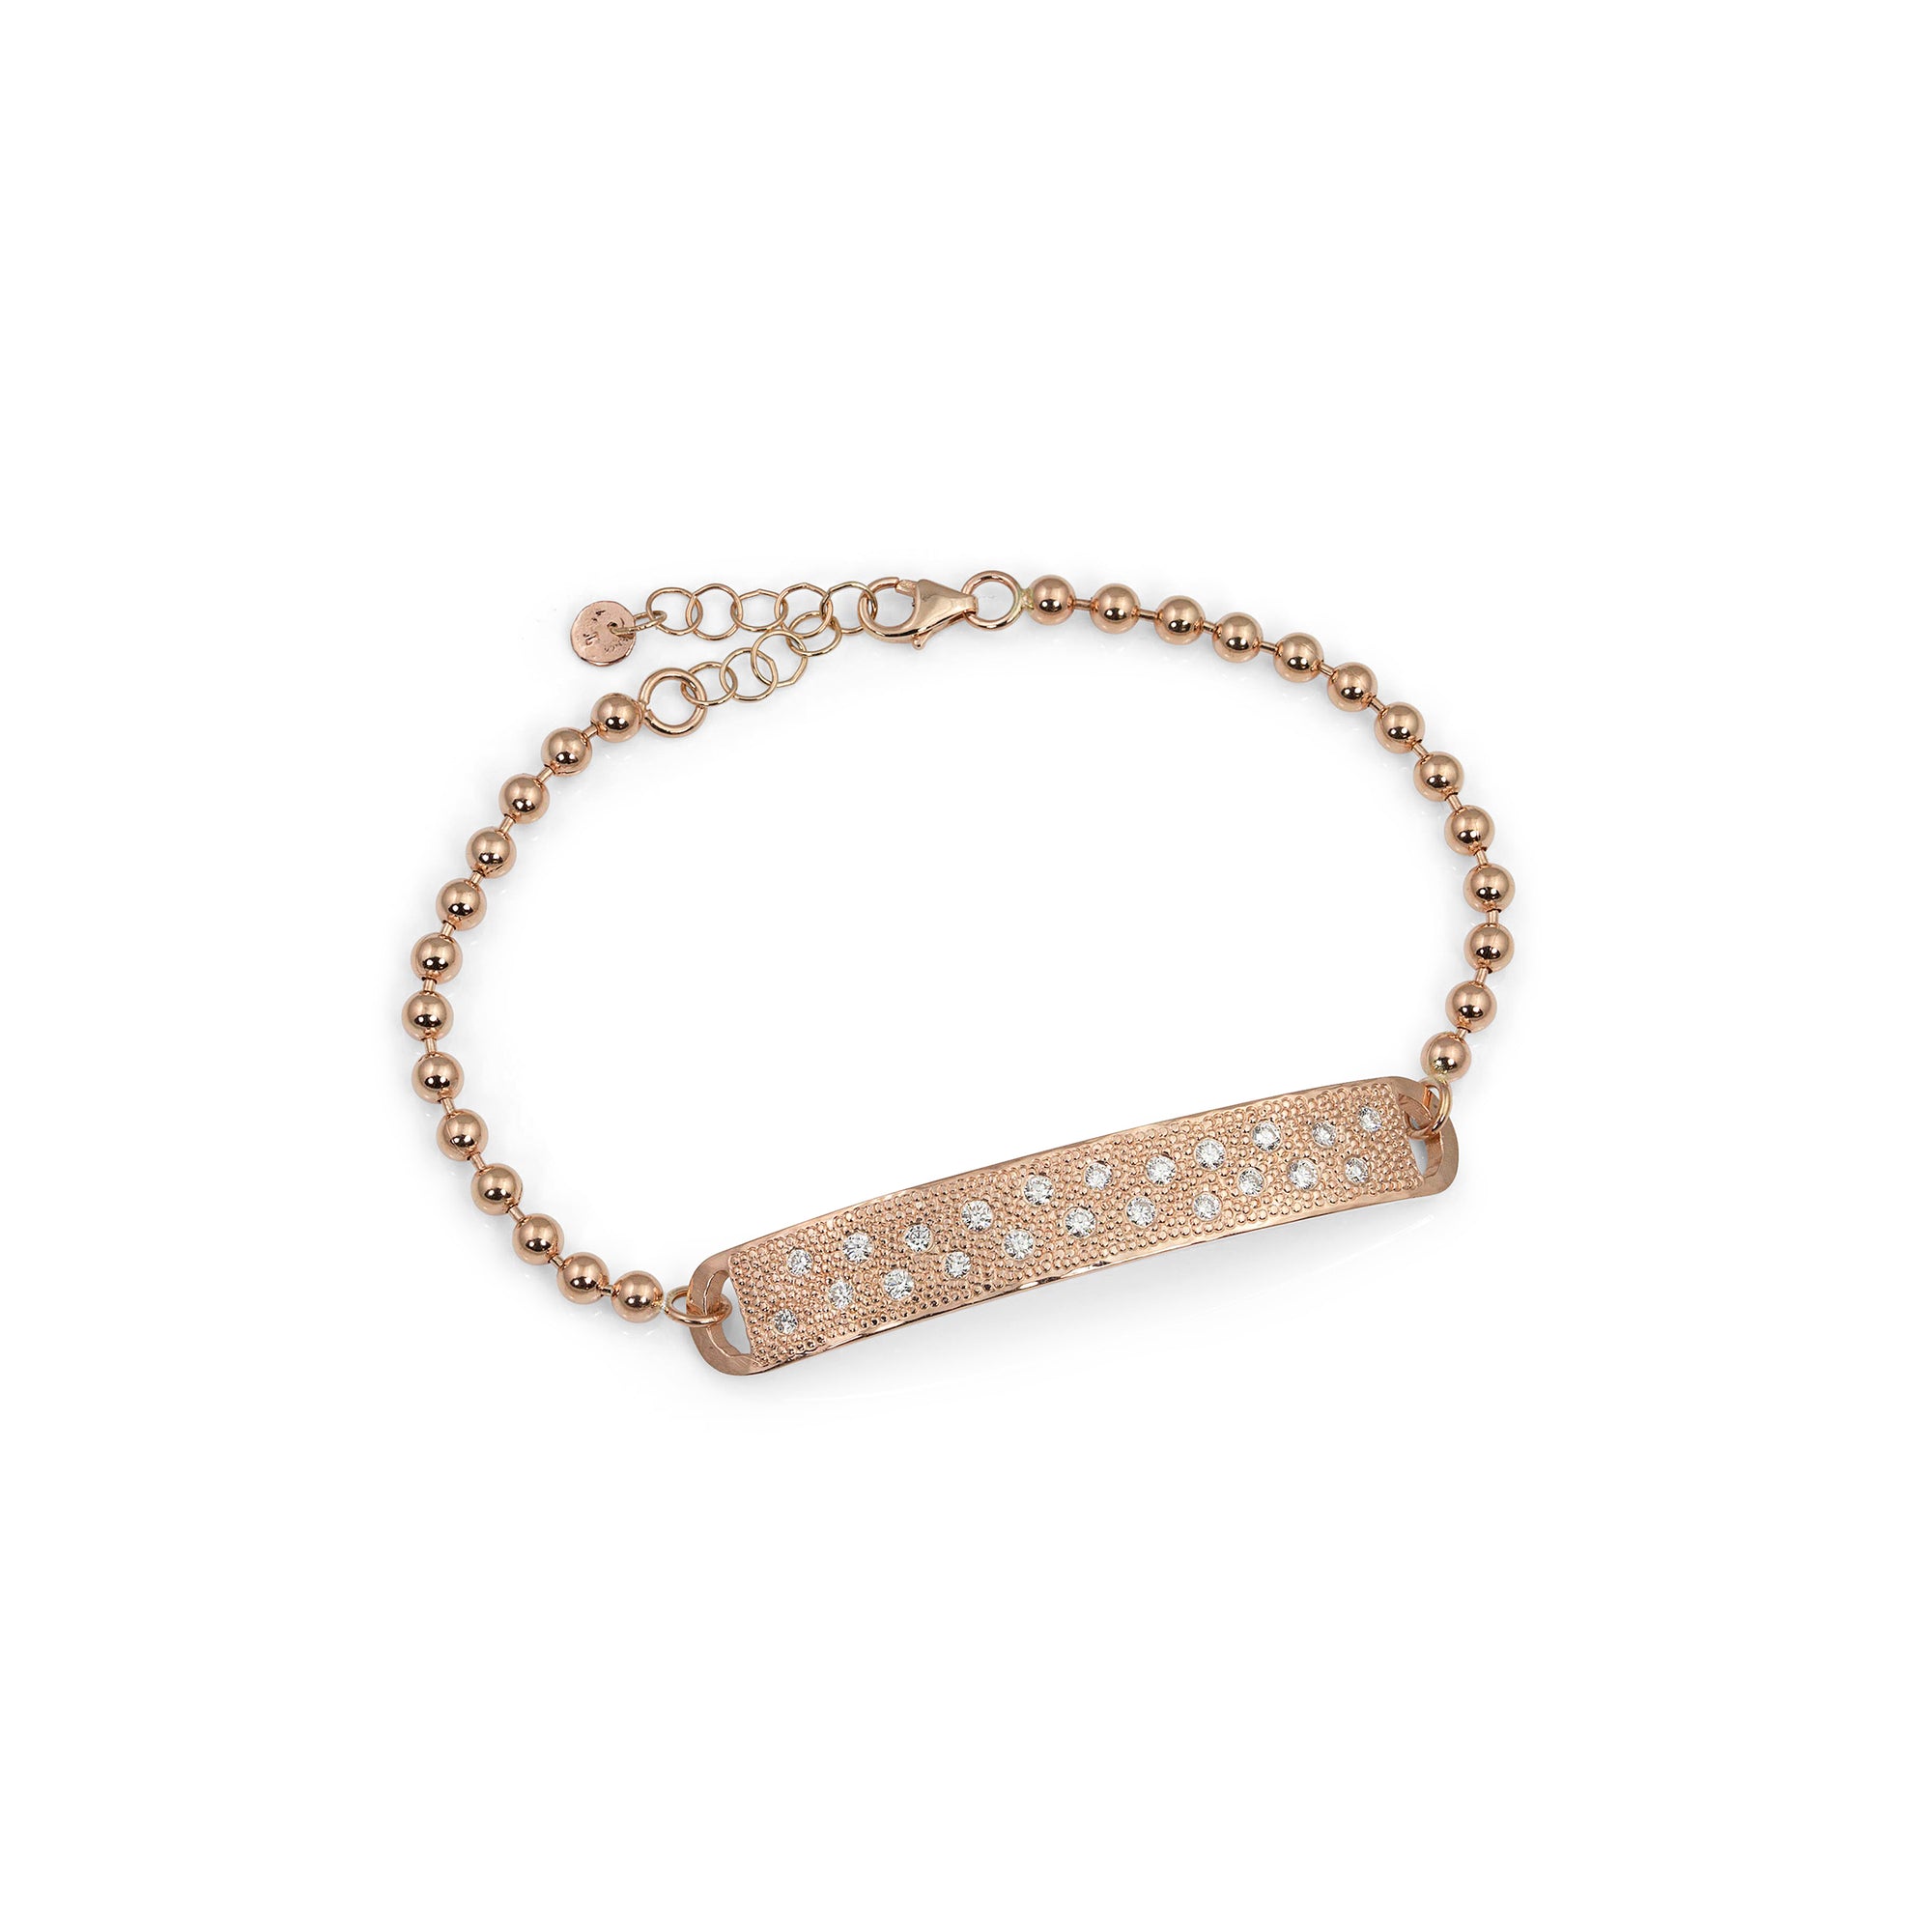 14k rose gold SOMA bar bracelet with scattered diamonds and 3.0mm ball link chain